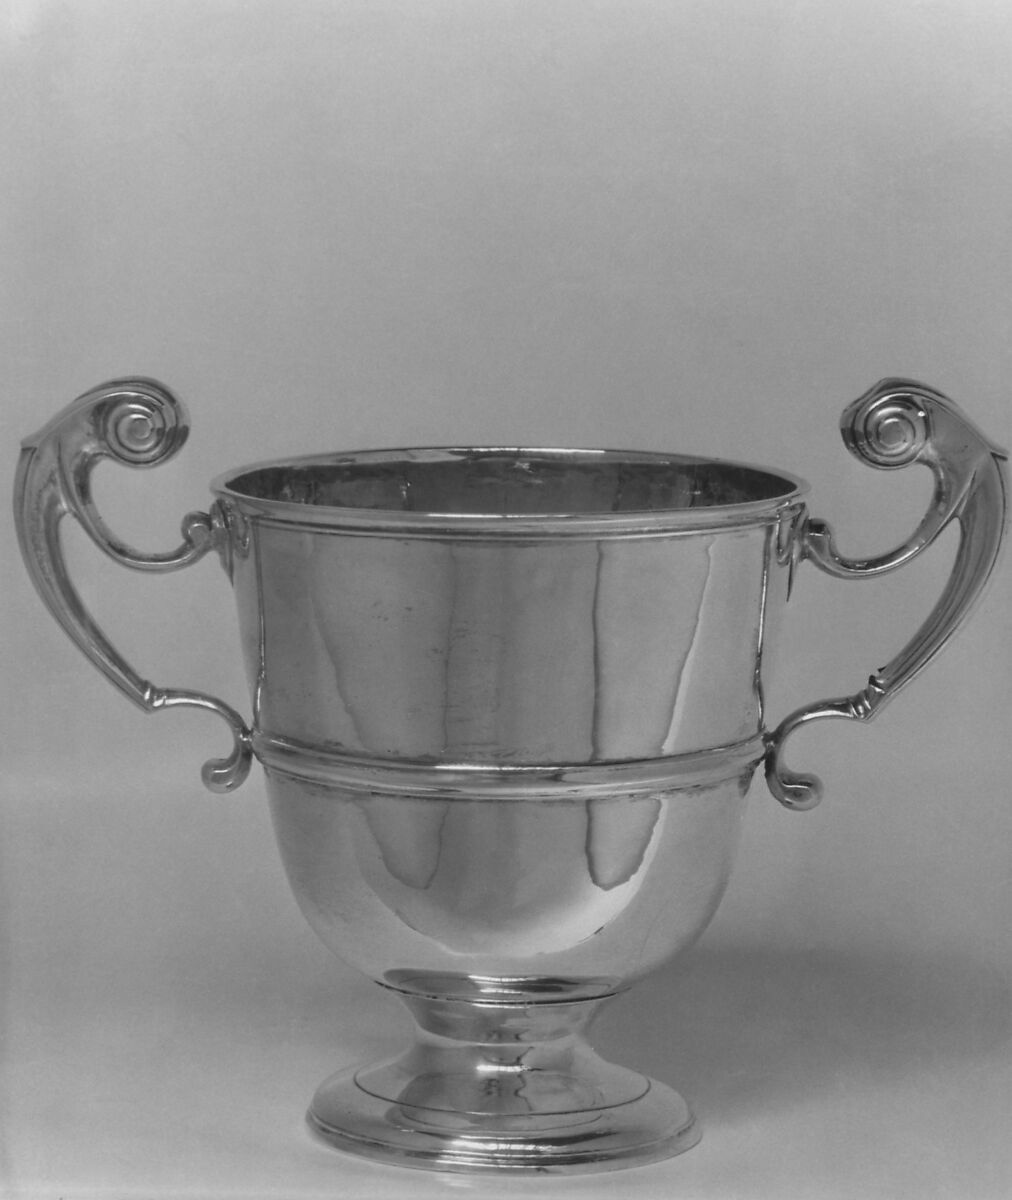 Two-handled cup, Probably by William Archdall, Silver, Irish, Dublin 